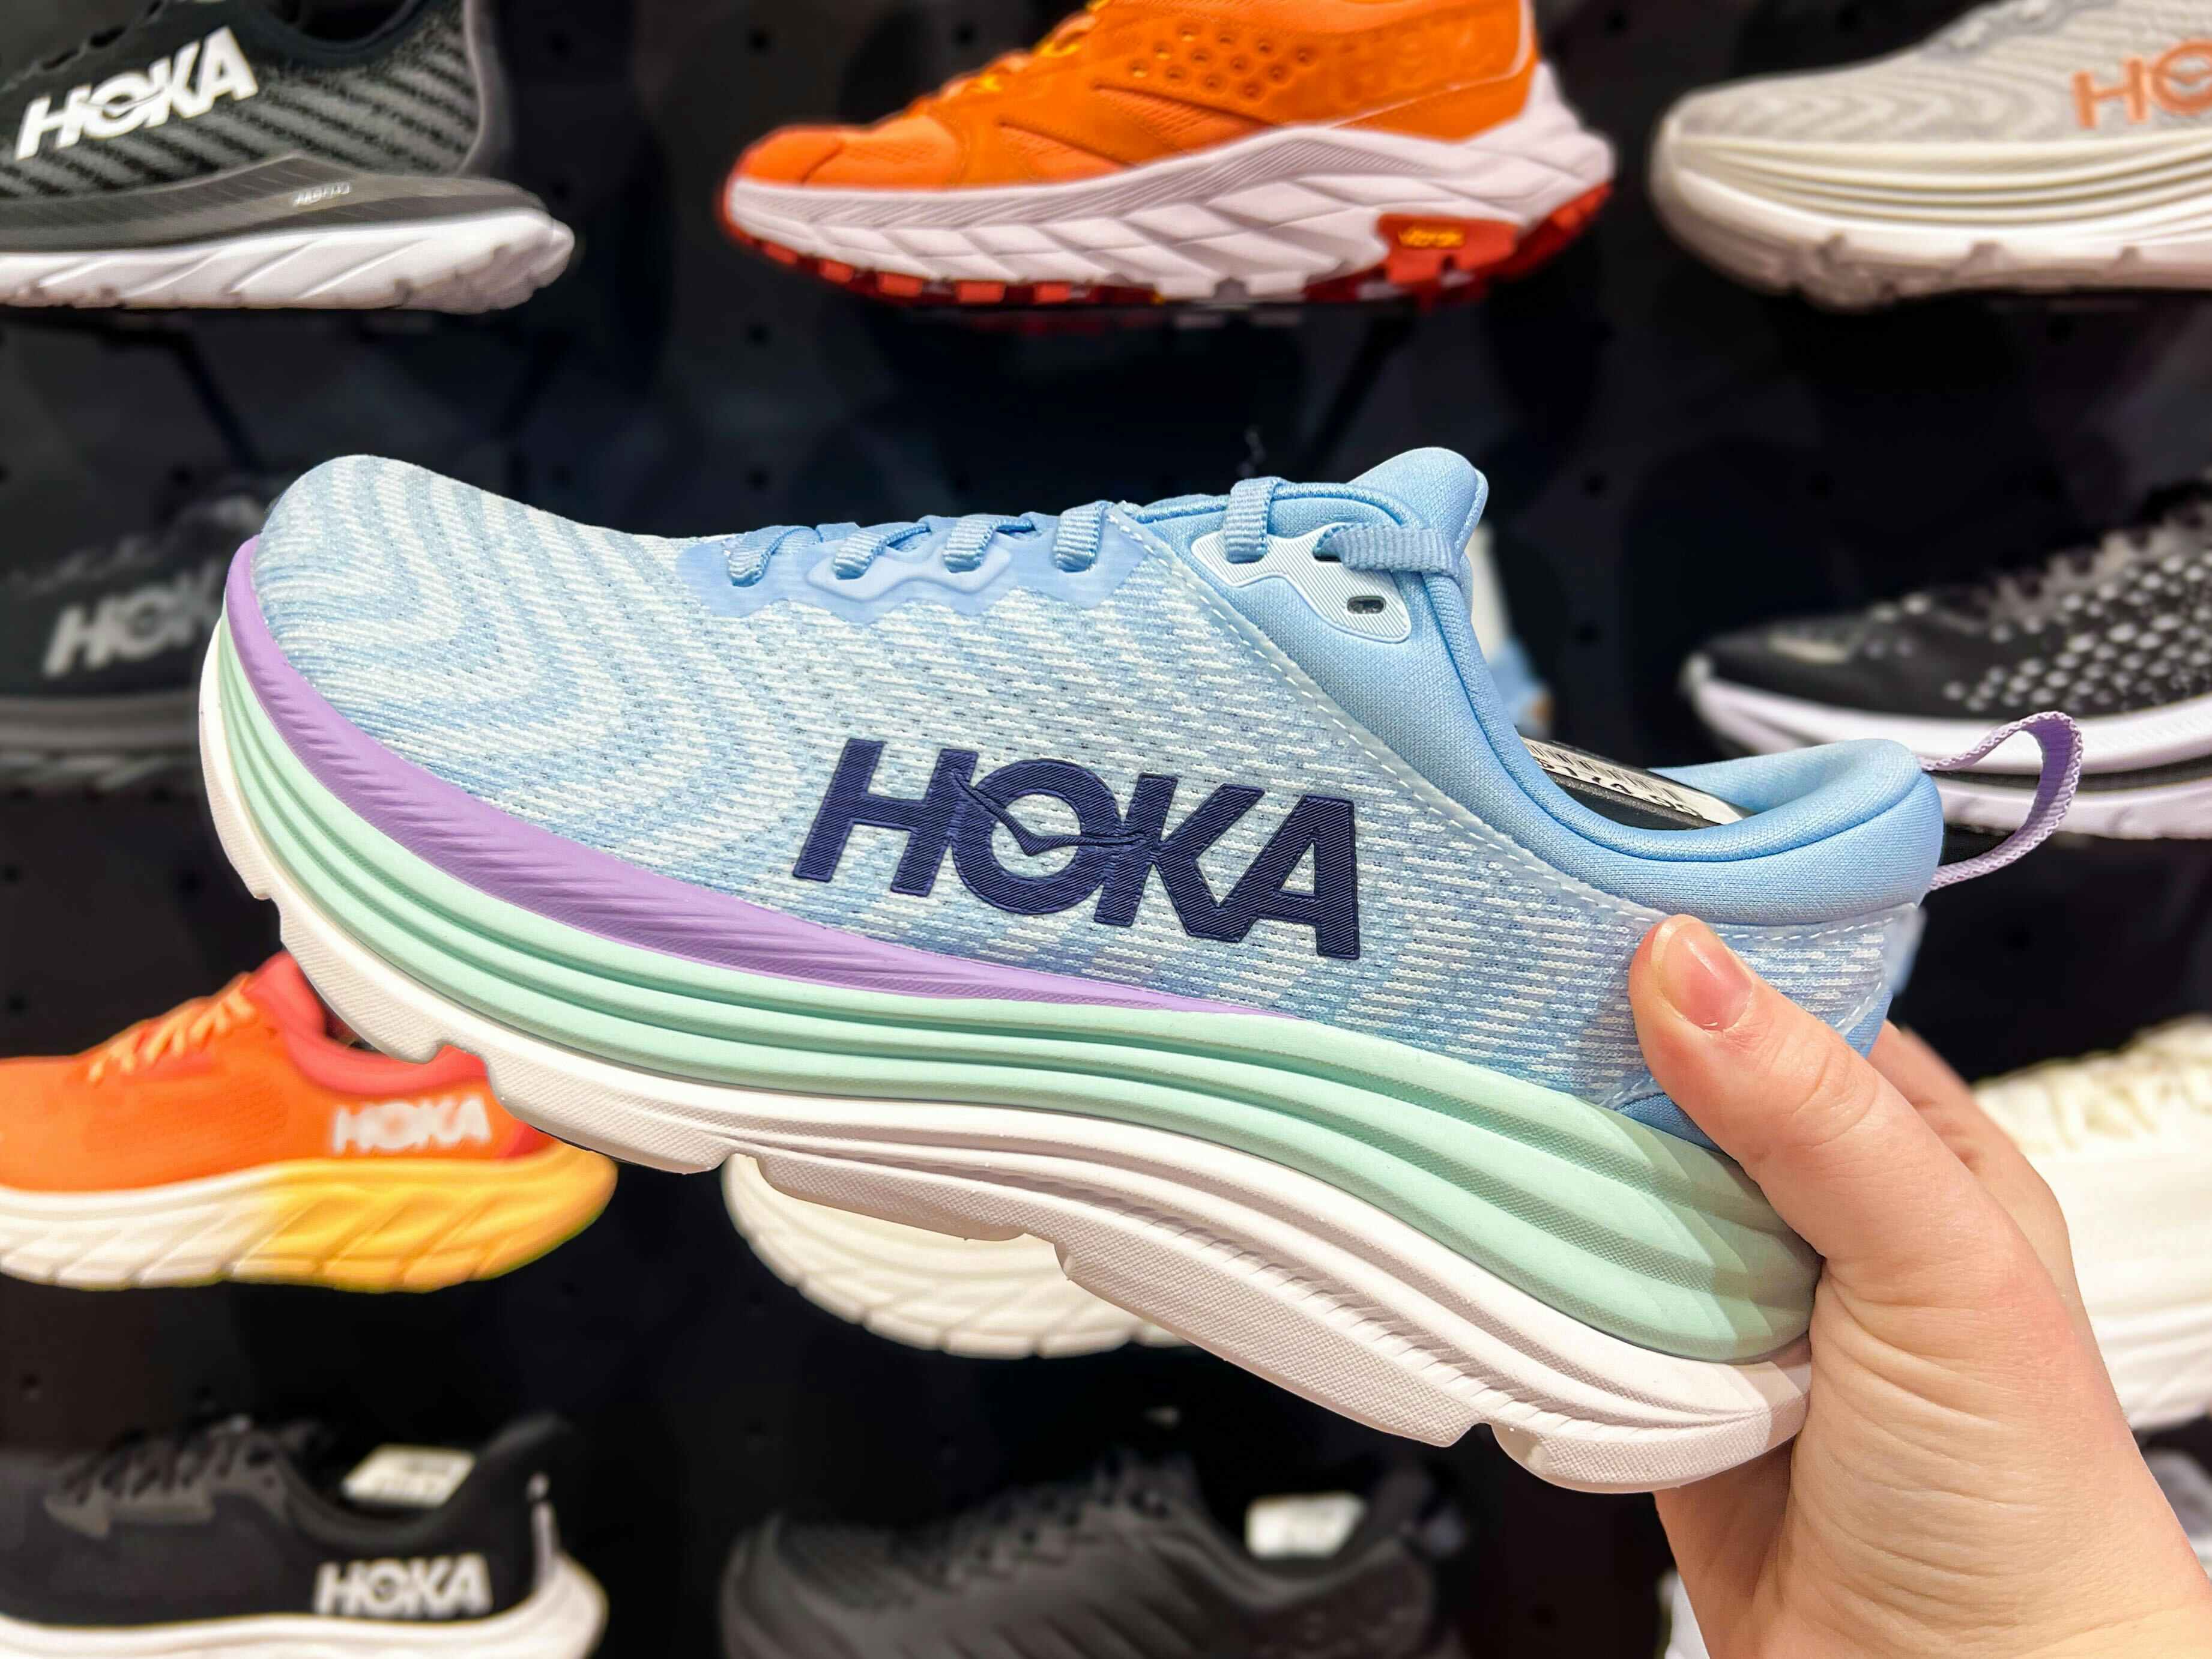 Hoka Running Shoes, as Low as $99.99 at Dick's Sporting Goods